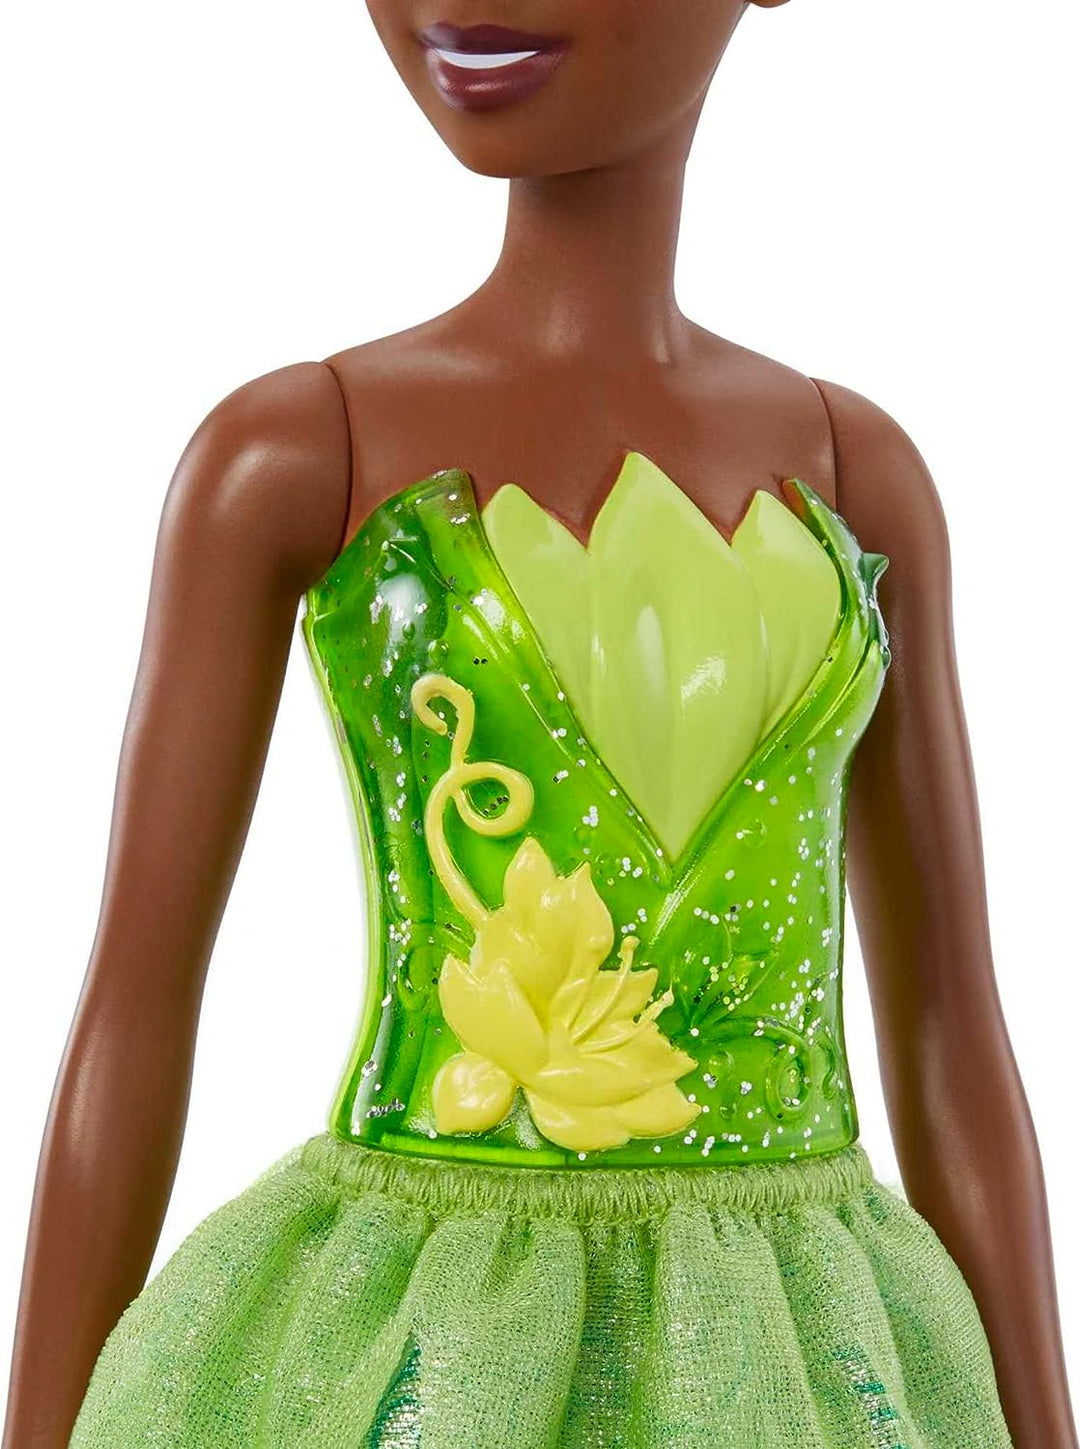 Disney Princess Toys, Tiana Posable Fashion Doll with Sparkling Clothing and Accessories